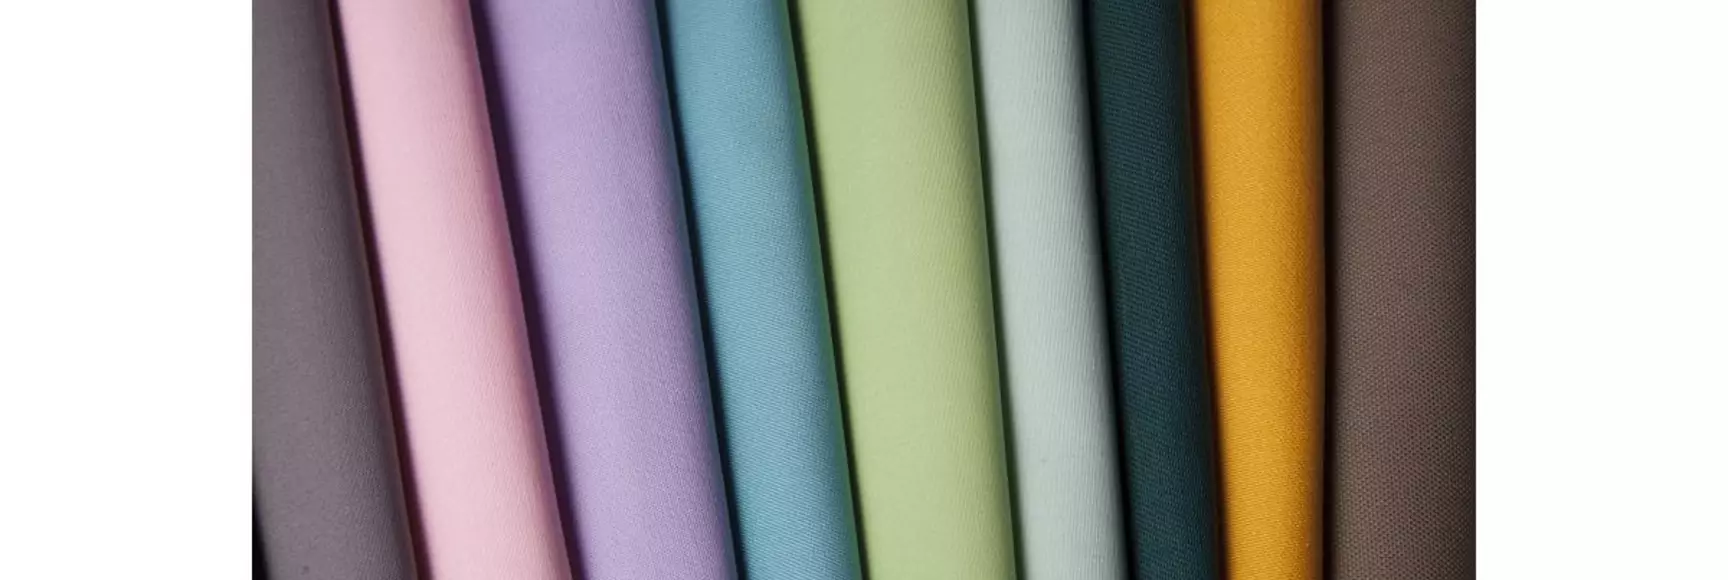 ©2019 Klopman International. Some of the colorful fabrics the mill produces for workwear, protectivewear and corporatewear. 